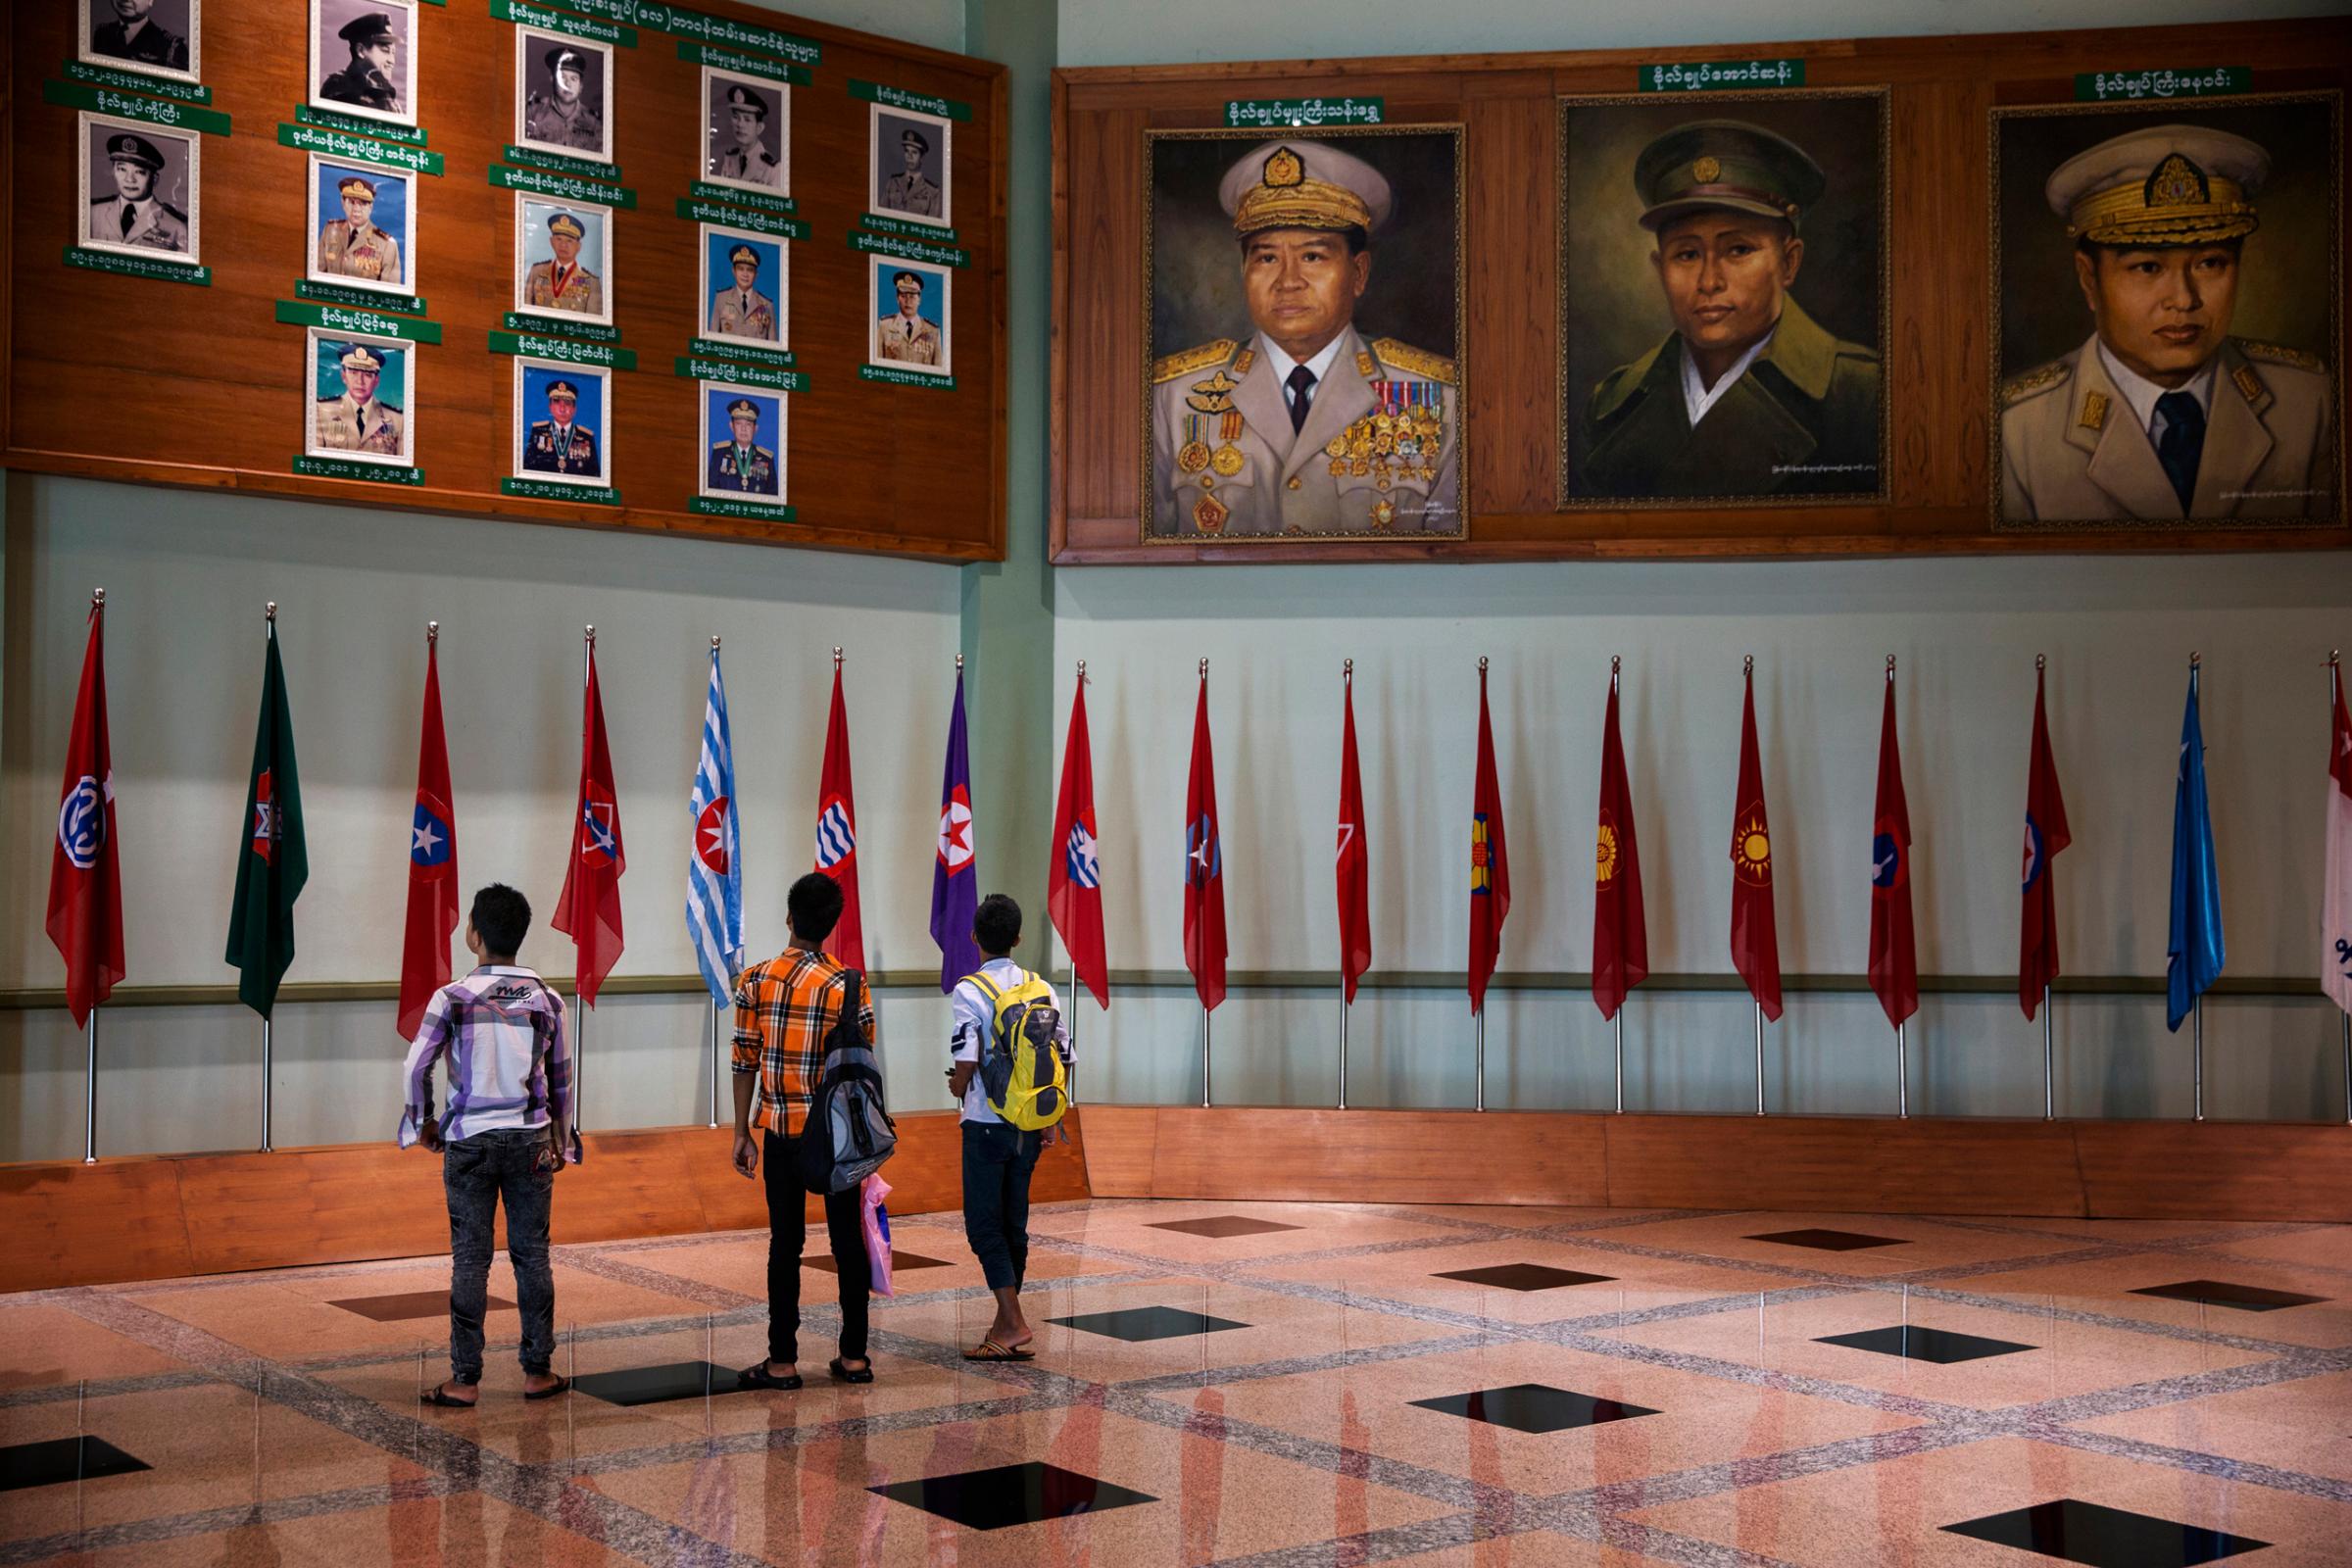 Students visit the Military Museum where  paintings of military leaders hang in Naypyidaw, Burma, Sept. 19, 2014.